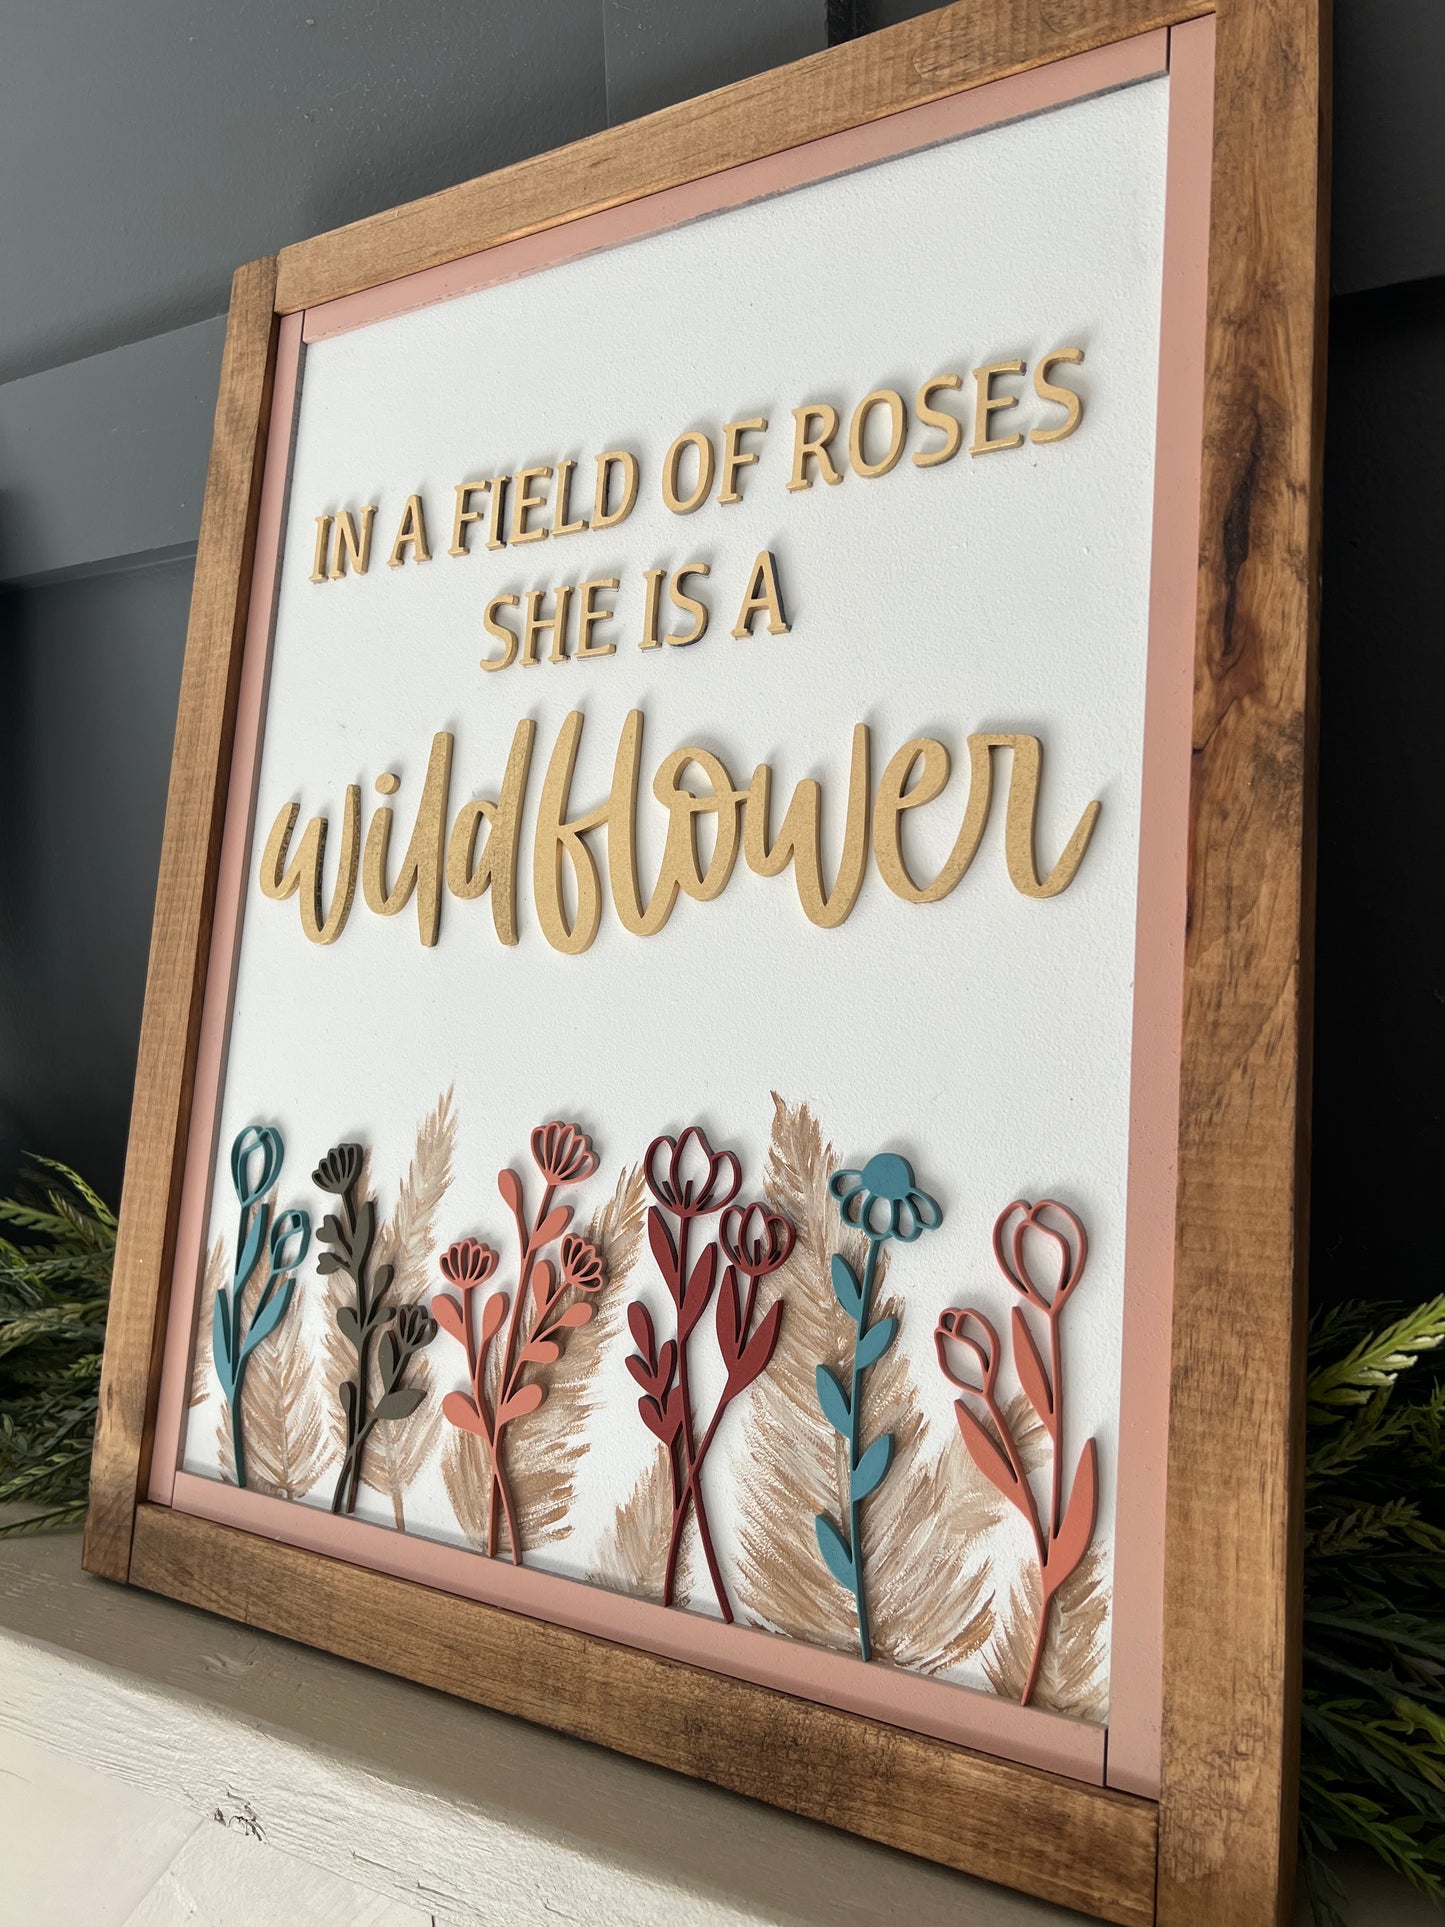 In a field of roses she is a wildflower sign. 16x20